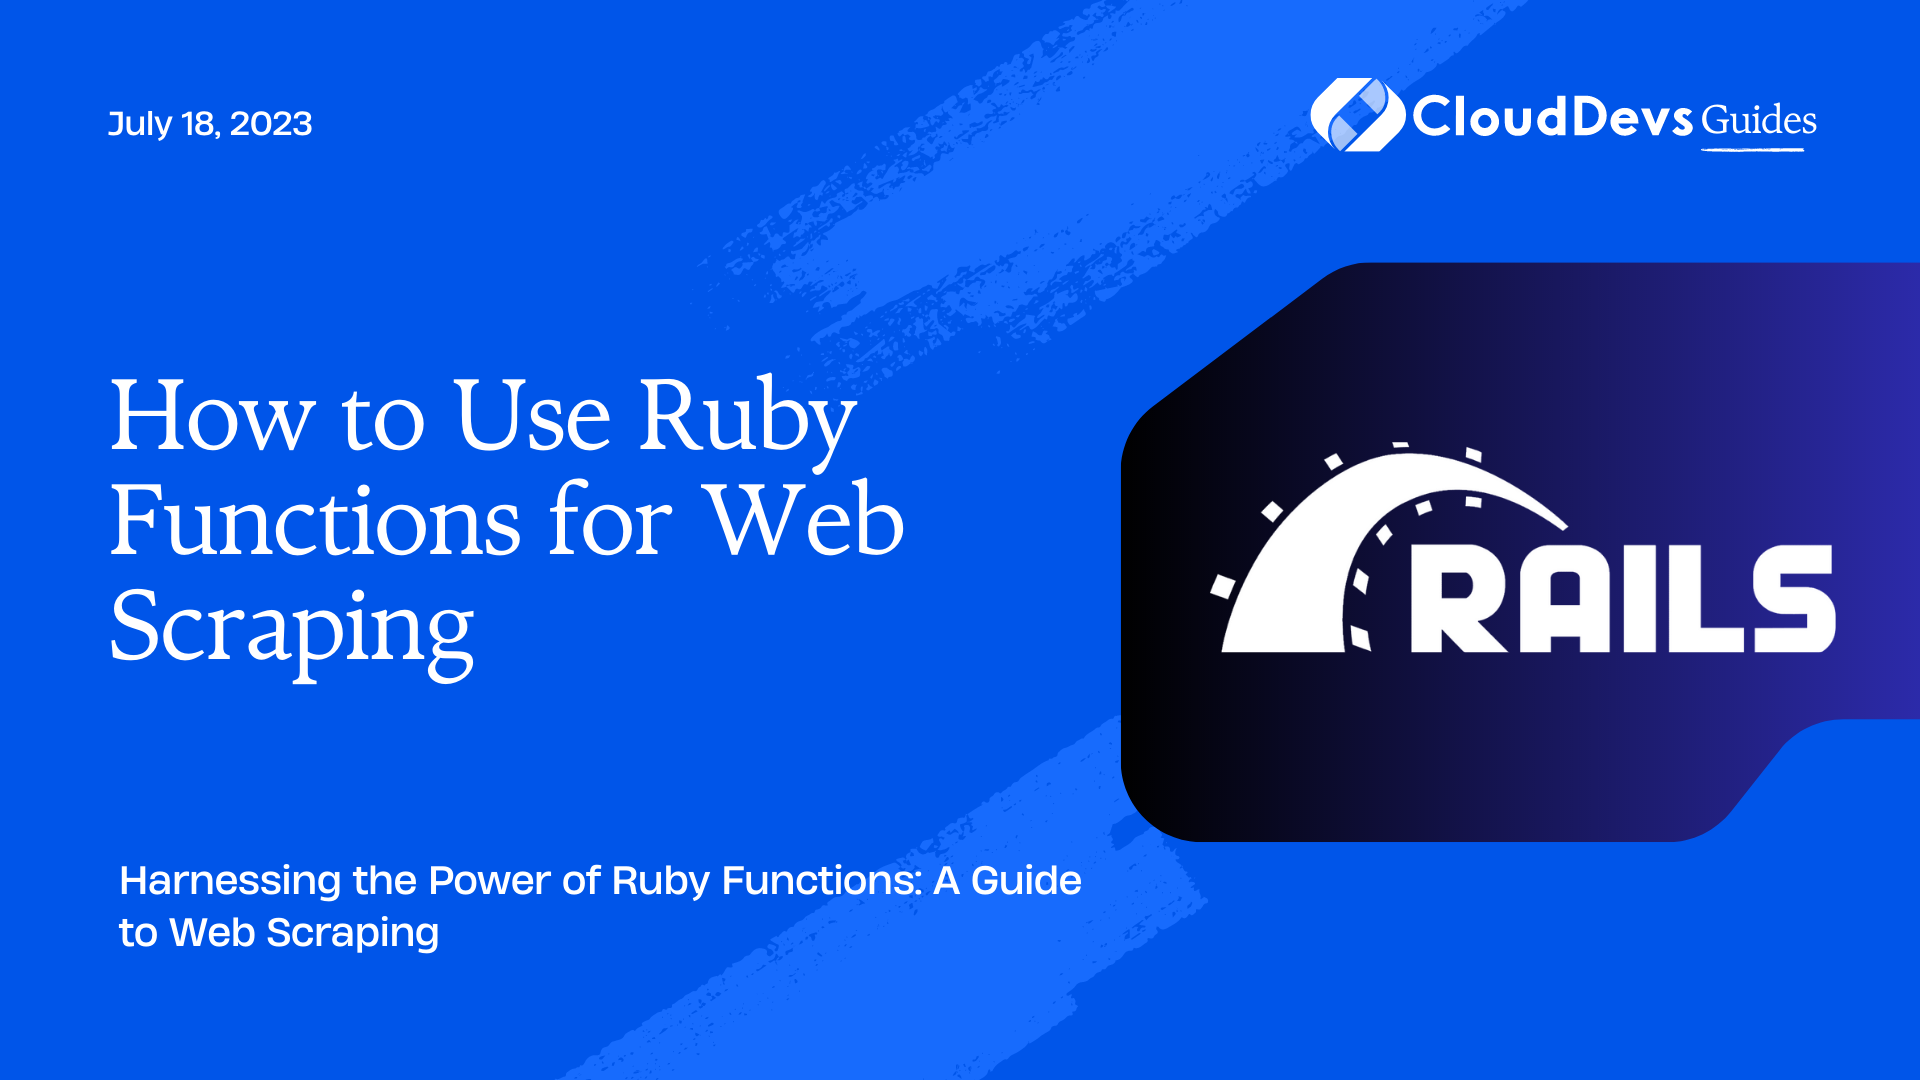 How to Use Ruby Functions for Web Scraping